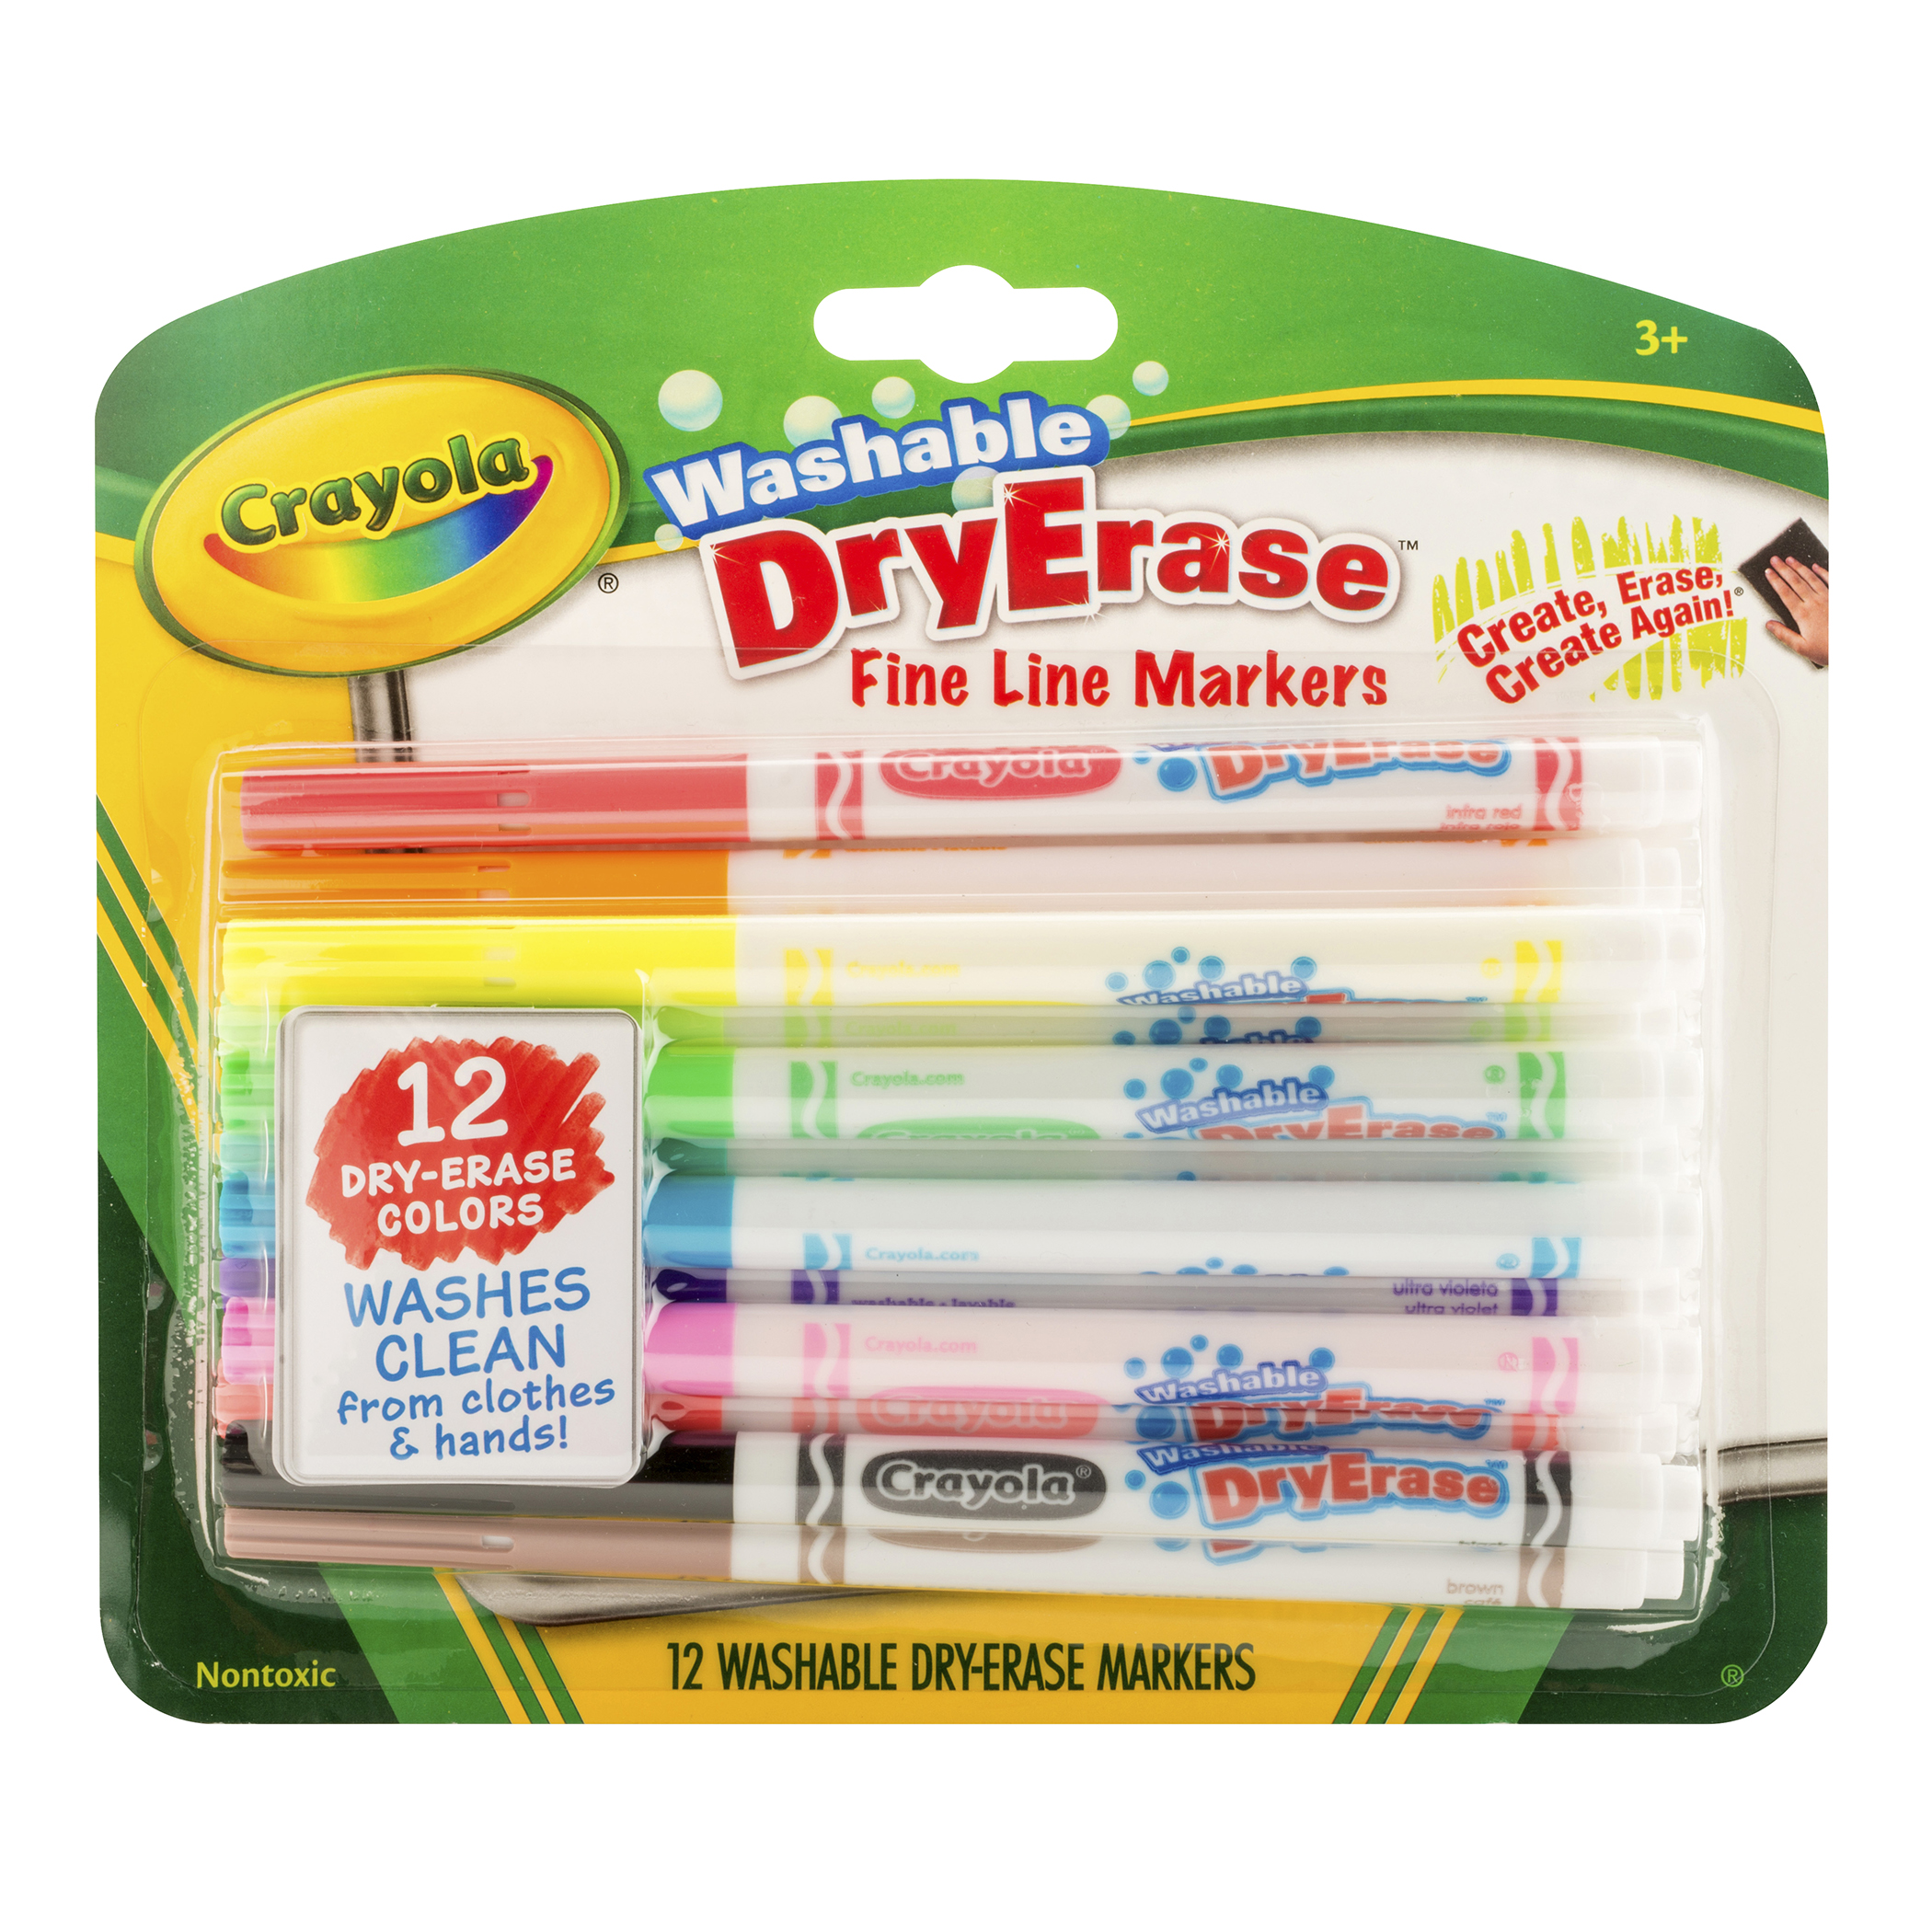 The Teachers' Lounge®  Ultra-Clean Washable Markers Classpack®, Fine Line,  10 Colors, Pack of 200